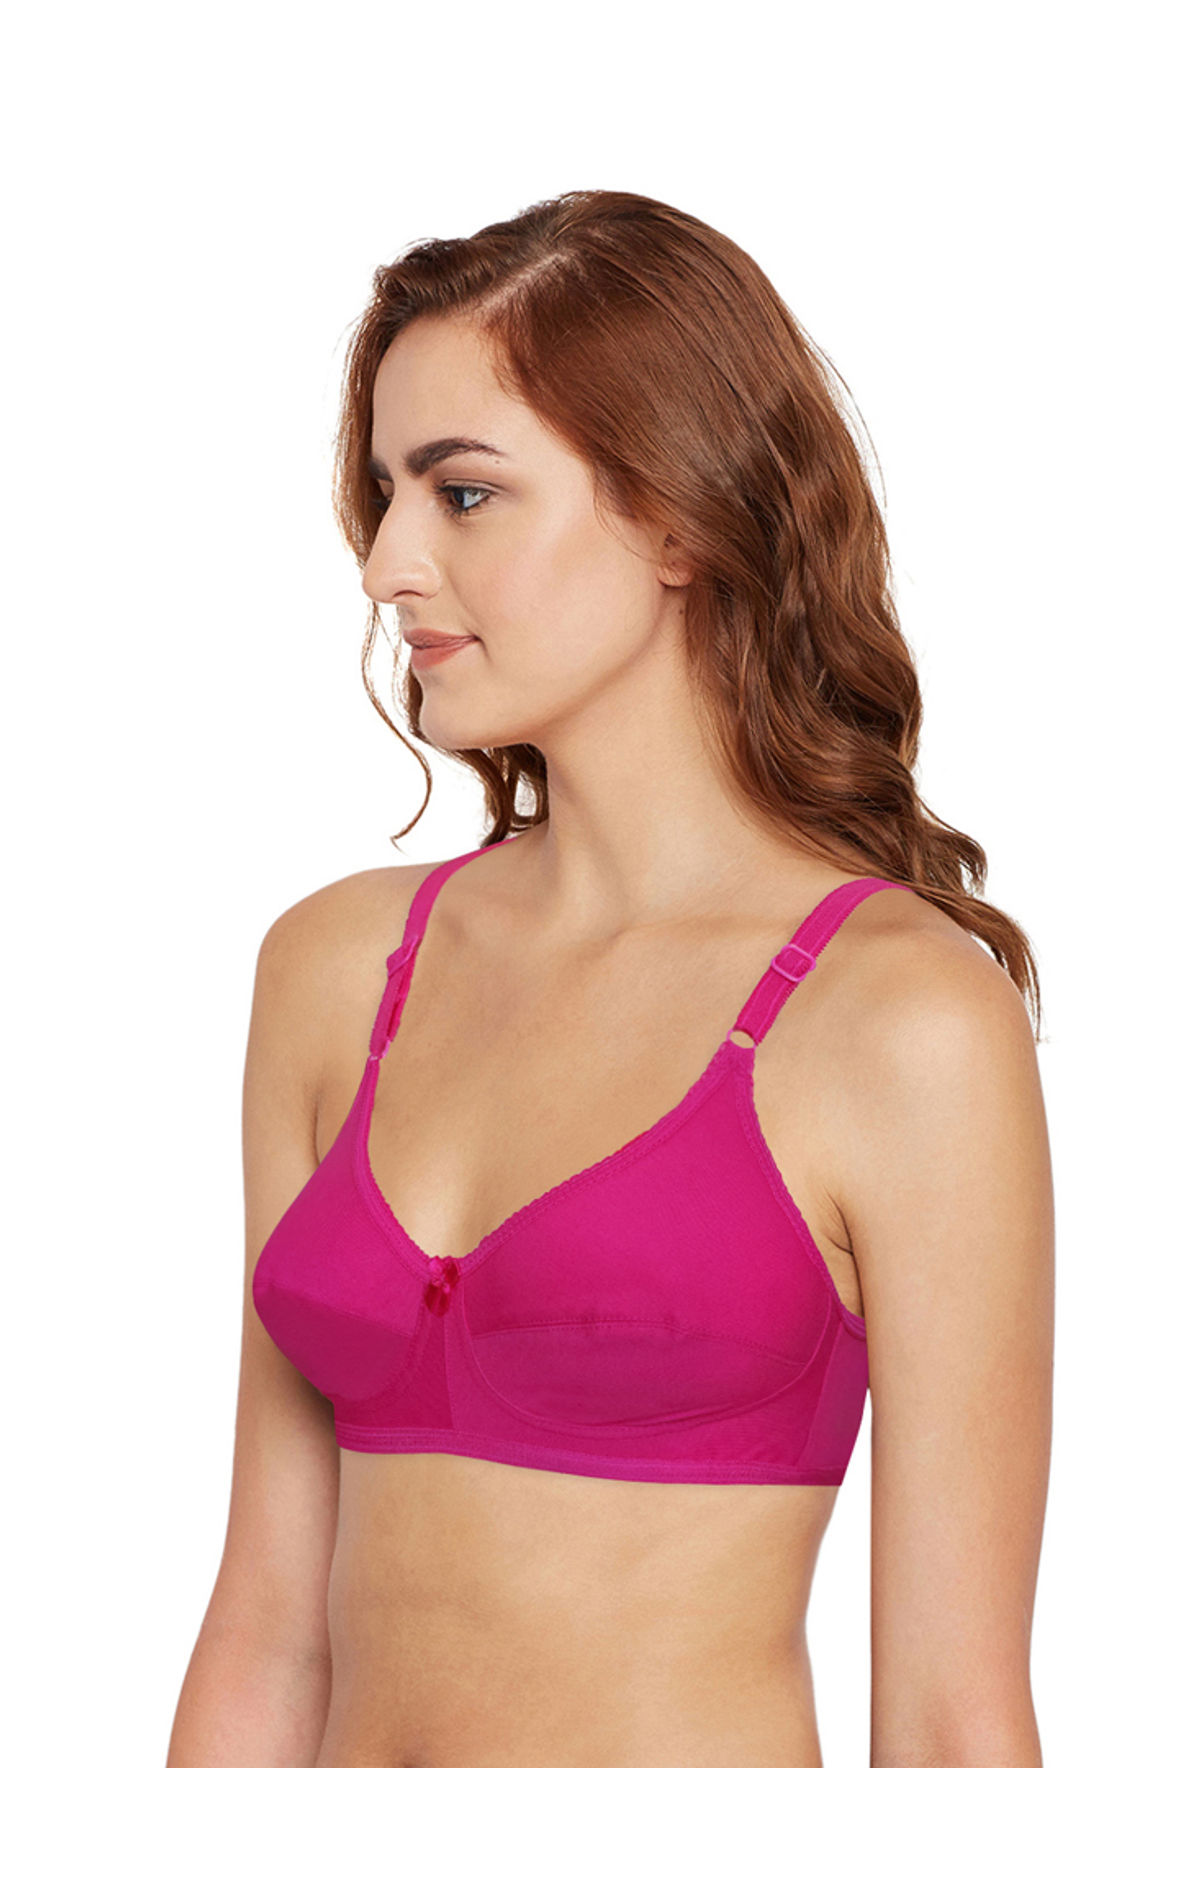 Beginners Plain Prince rani pink cotton colour'c cup bra at Rs 90